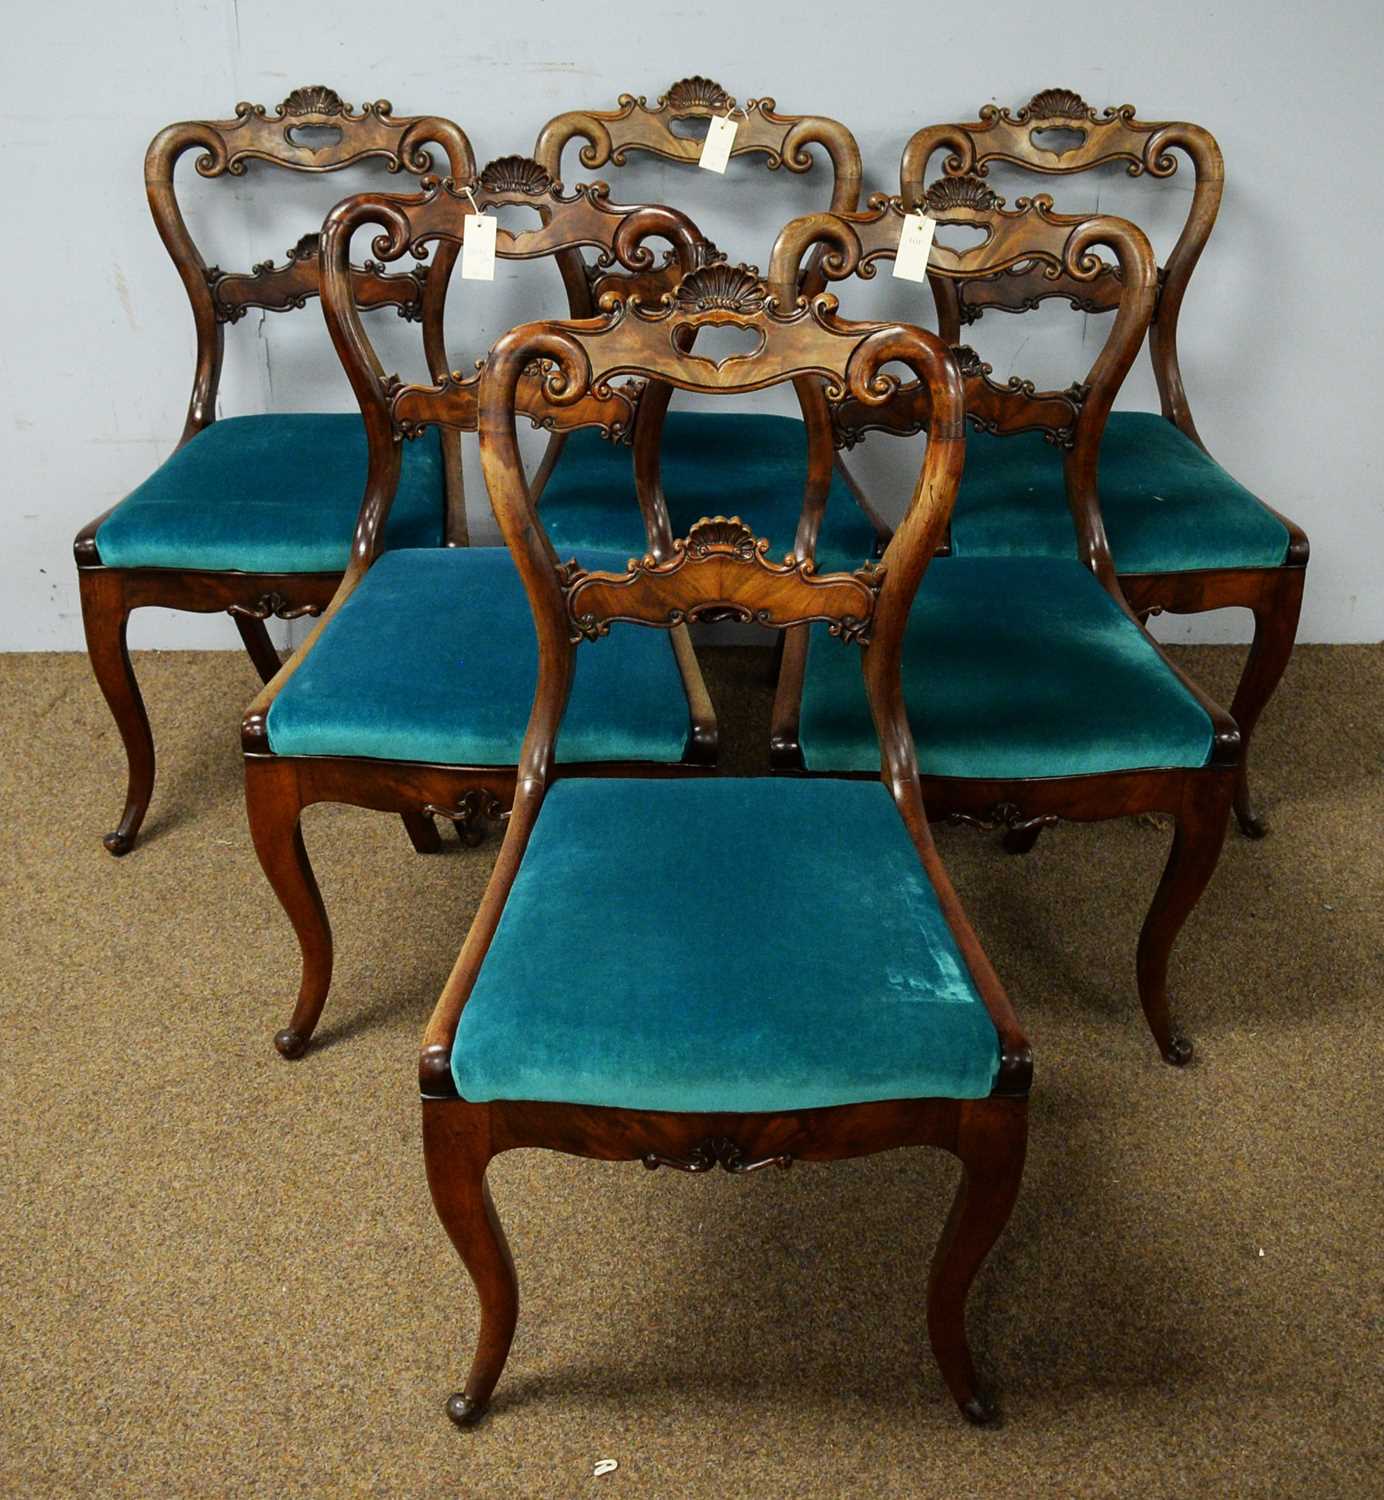 Lot 23 - Set of six early 20th C walnut spoon-back dining chairs.